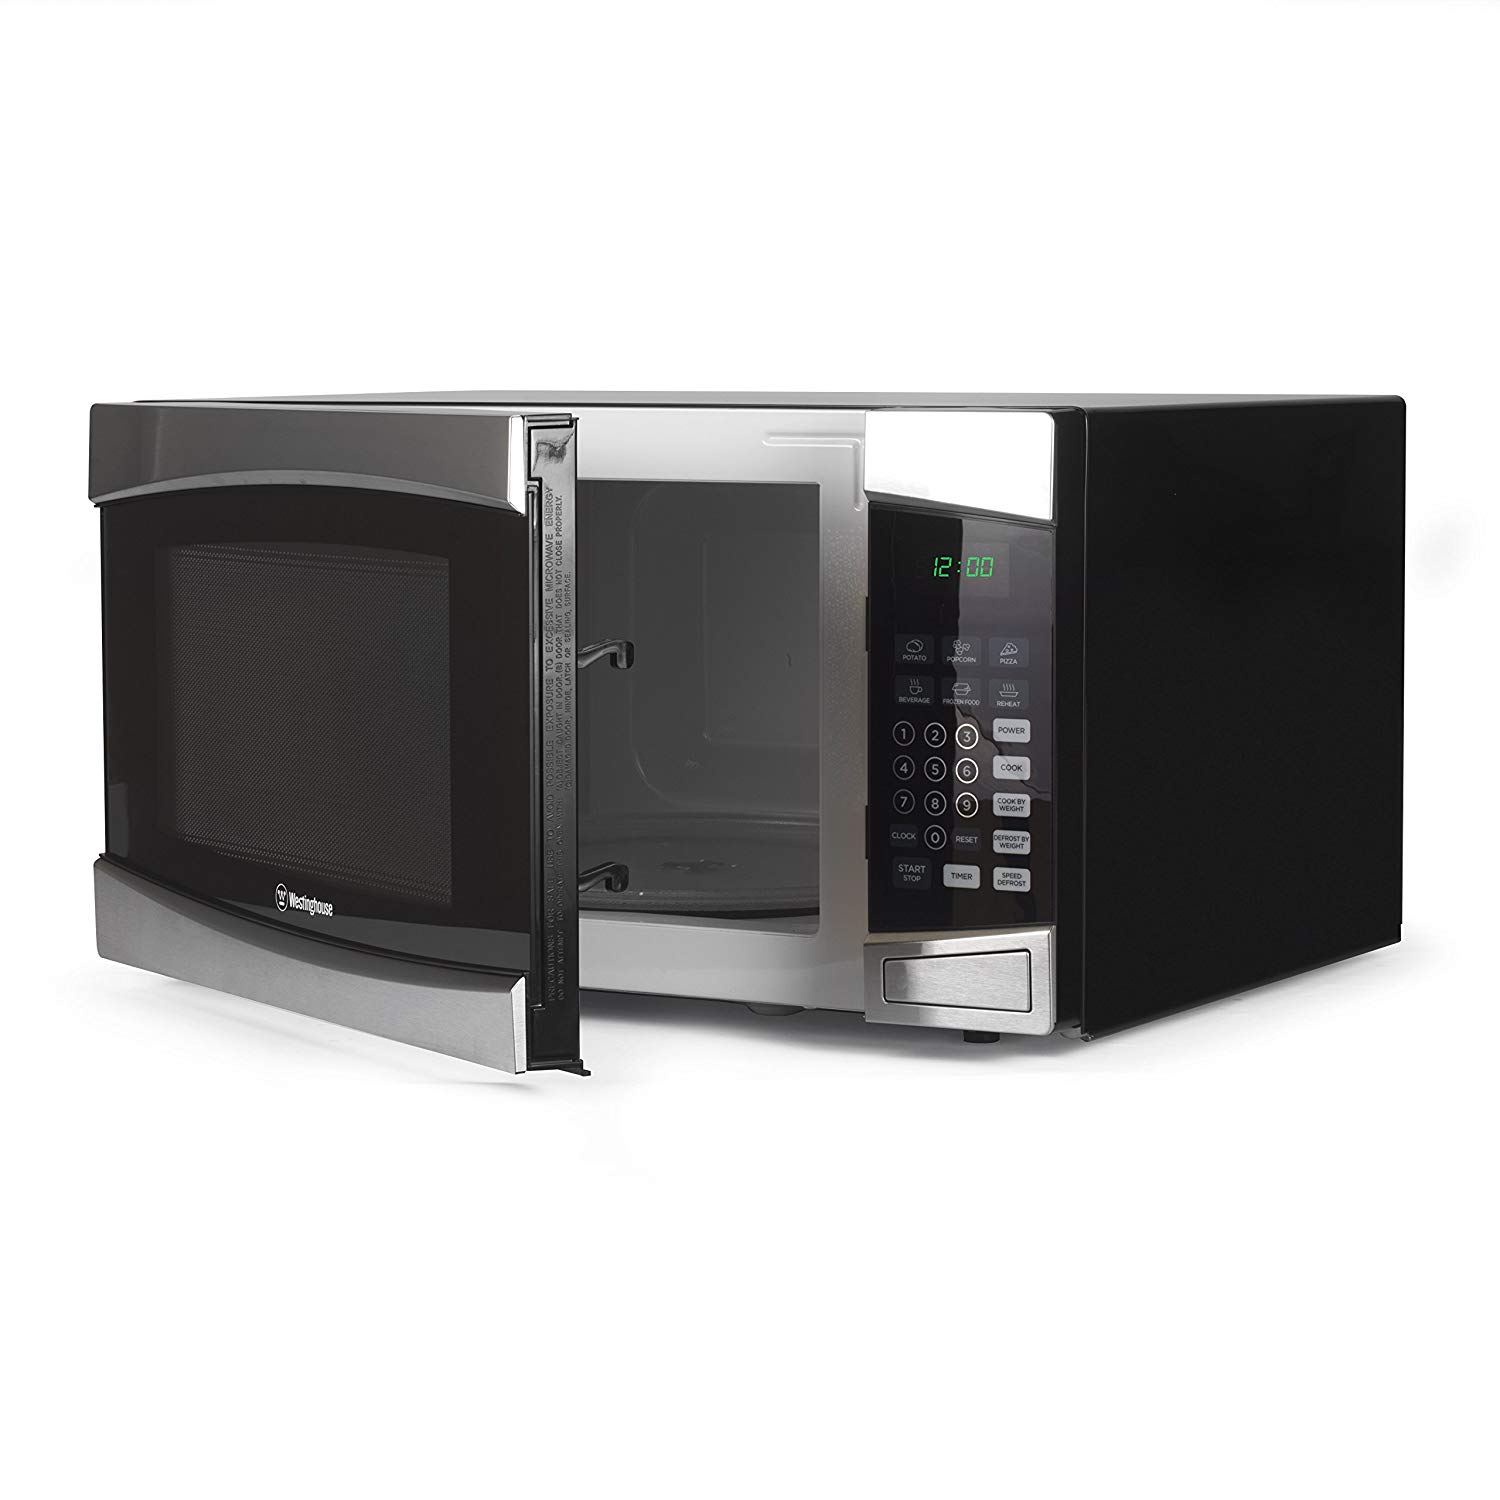 Westinghouse WCM16100SS 1000 Watt Counter Top Microwave Oven, 1.6 Cubic Feet, Stainless Steel Front, Black Cabinet